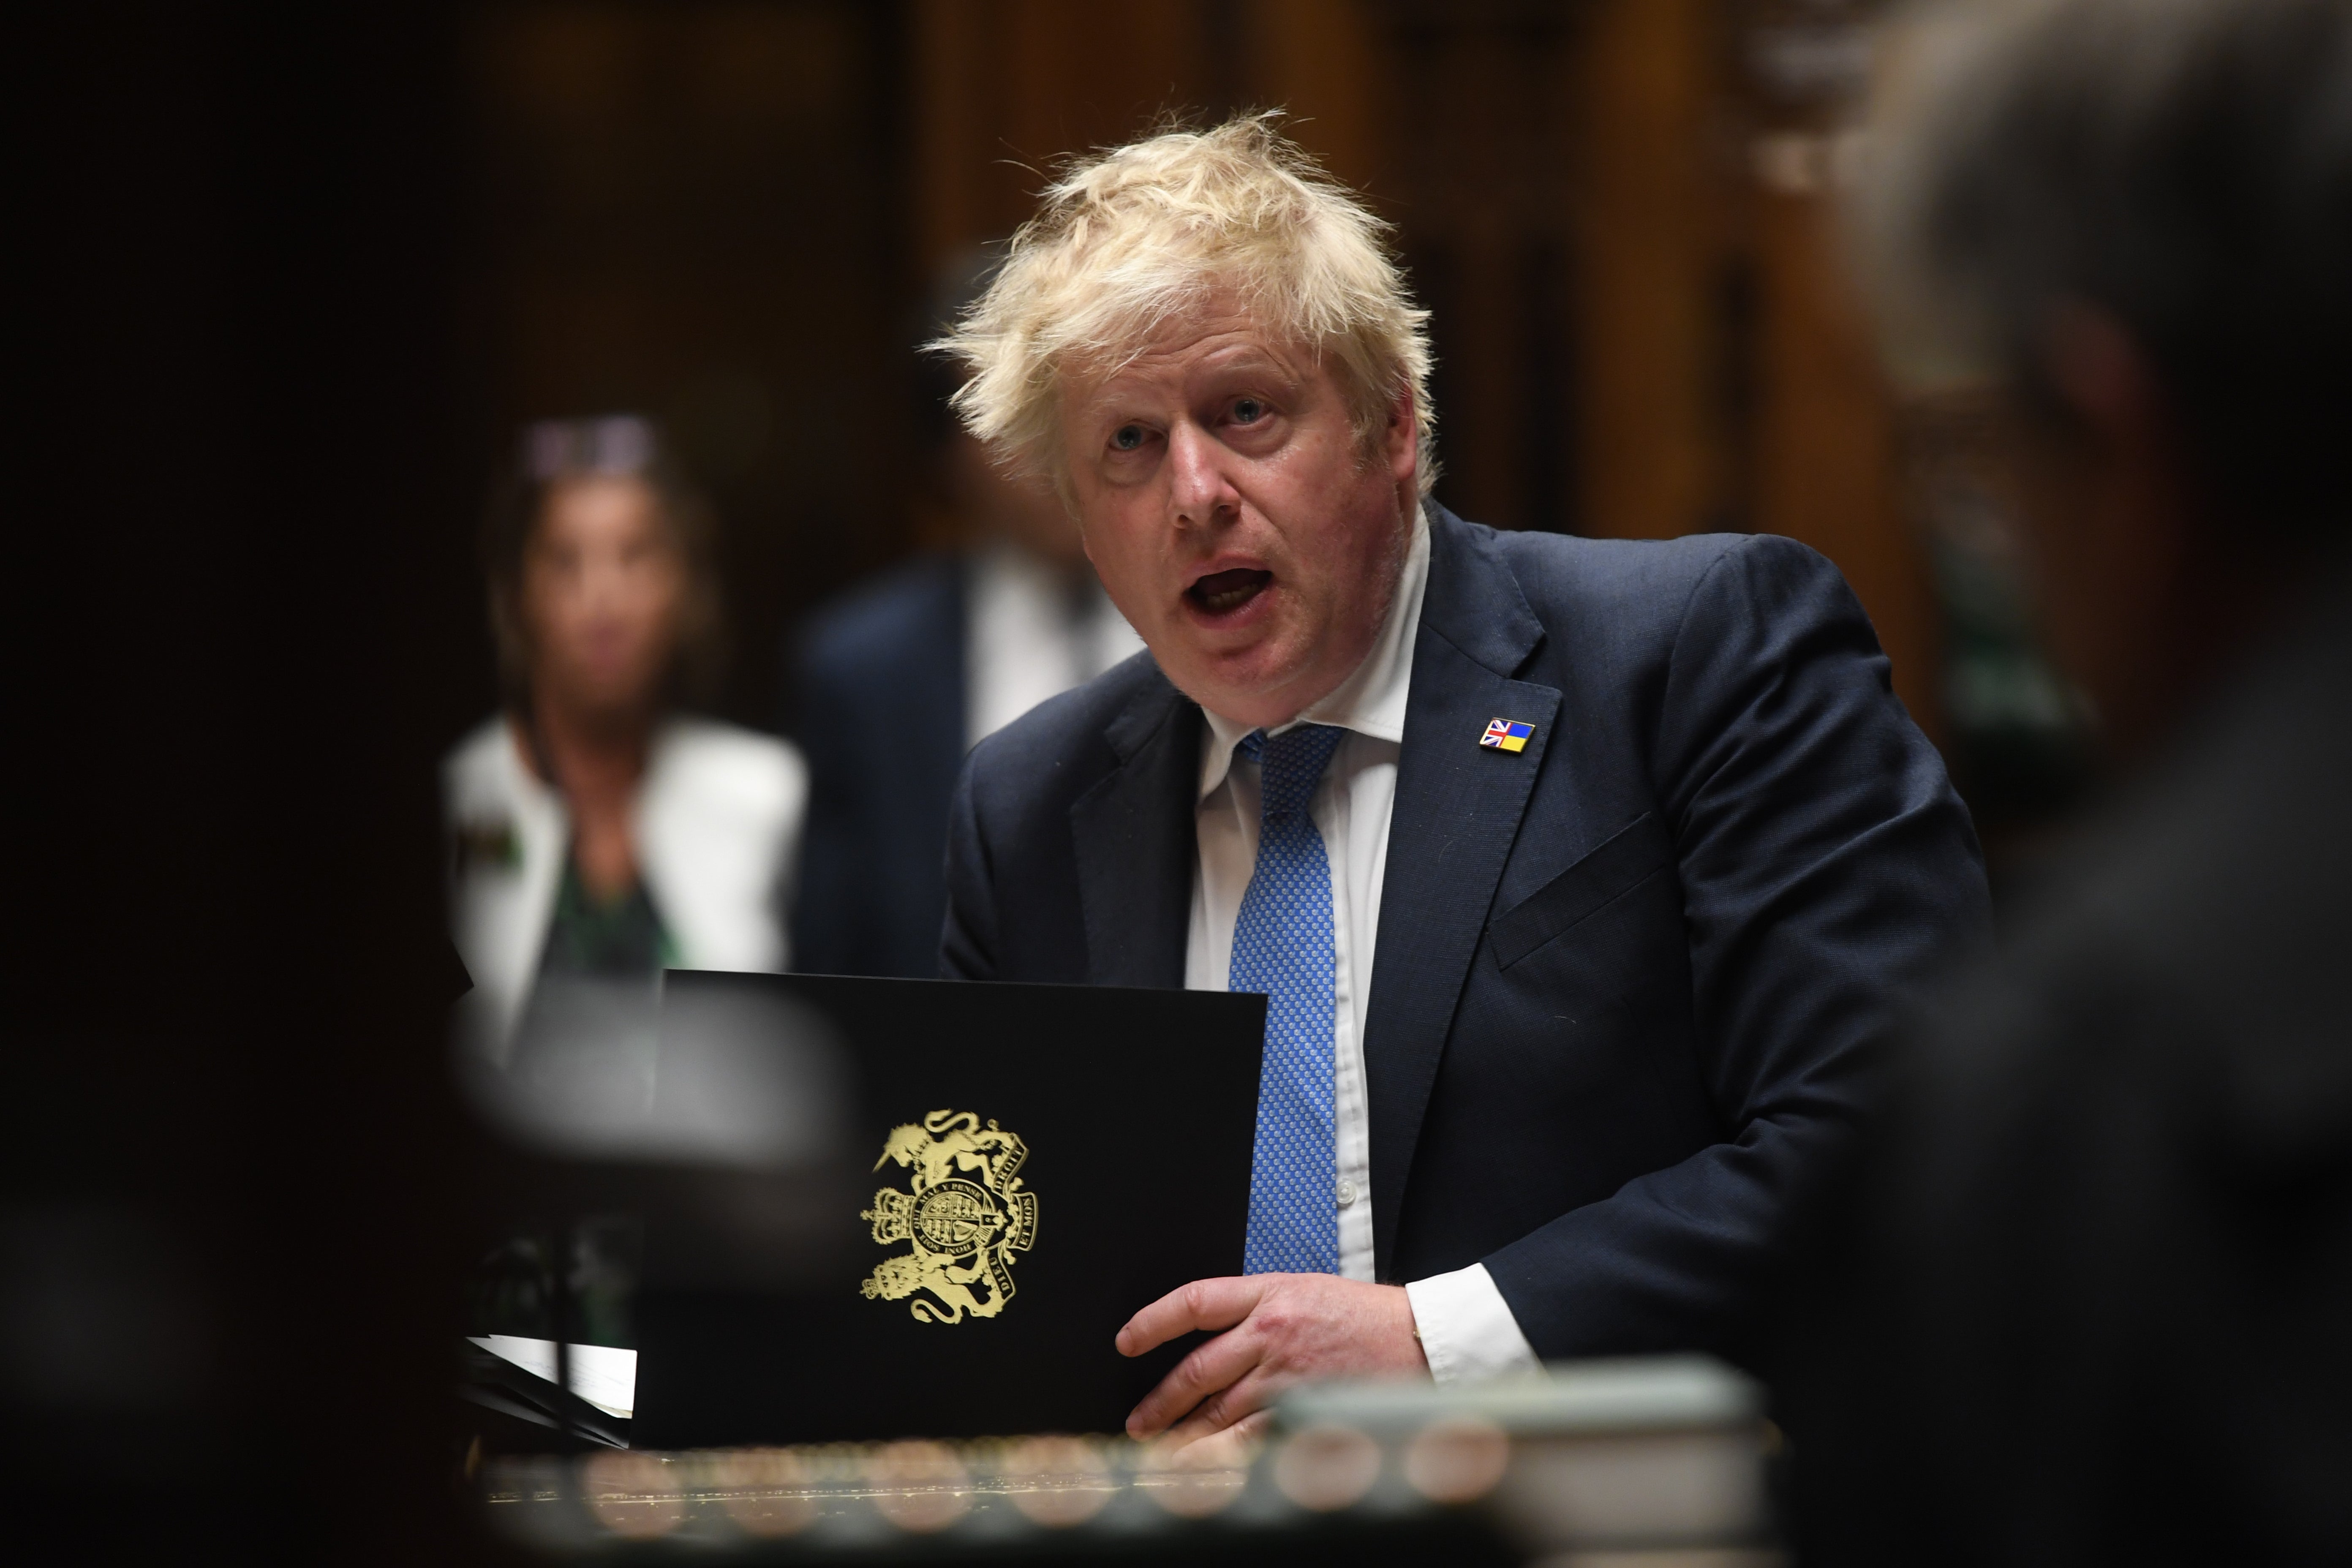 Johnson apologised to Commons on Tuesday